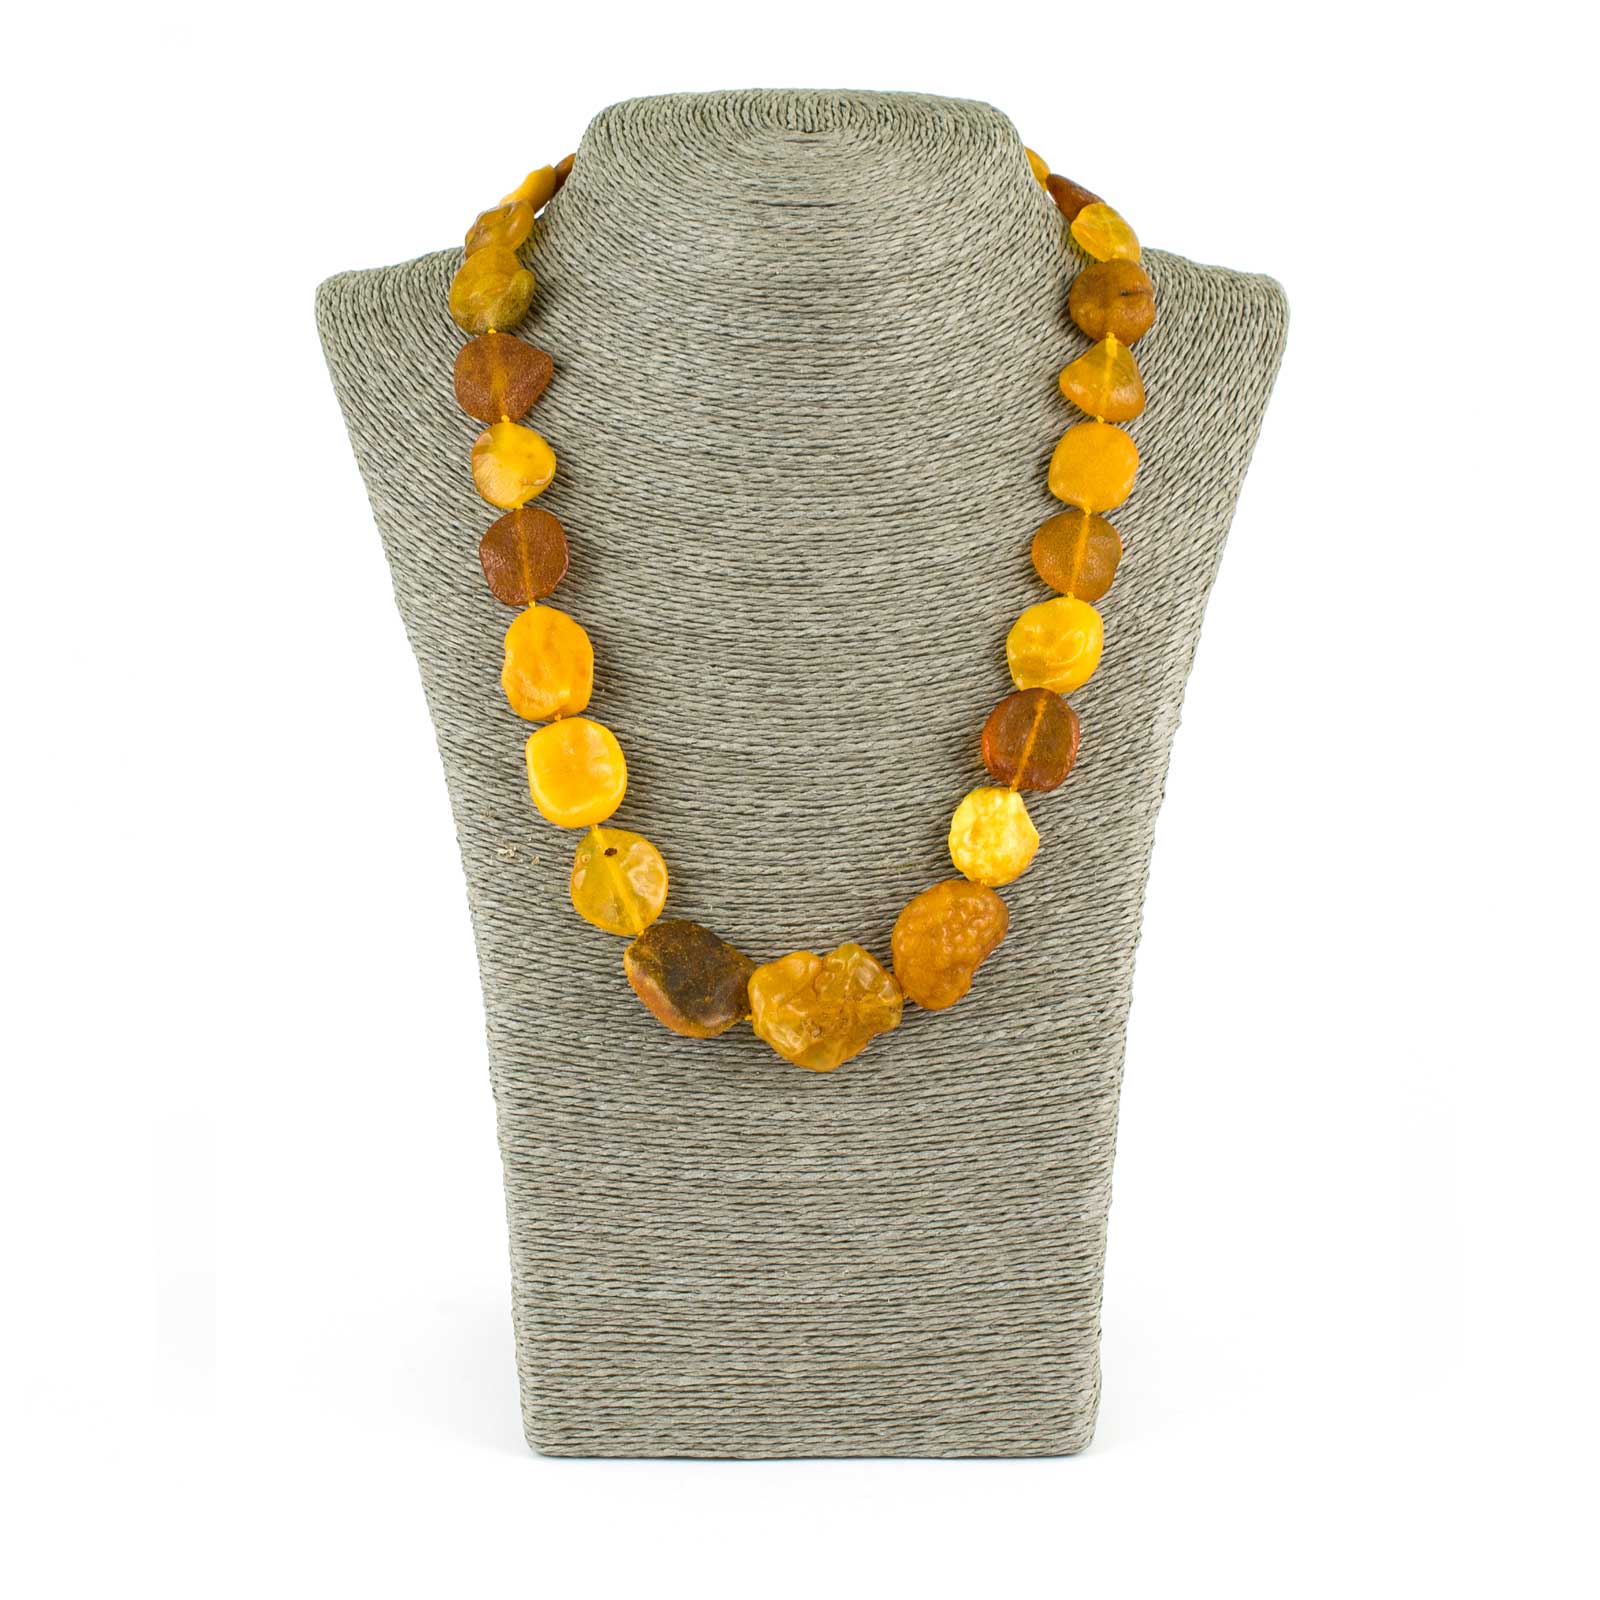 Details about   Natural Amber Necklace Beaded Amber Necklace Natural Raw Amber Stones Handmade 